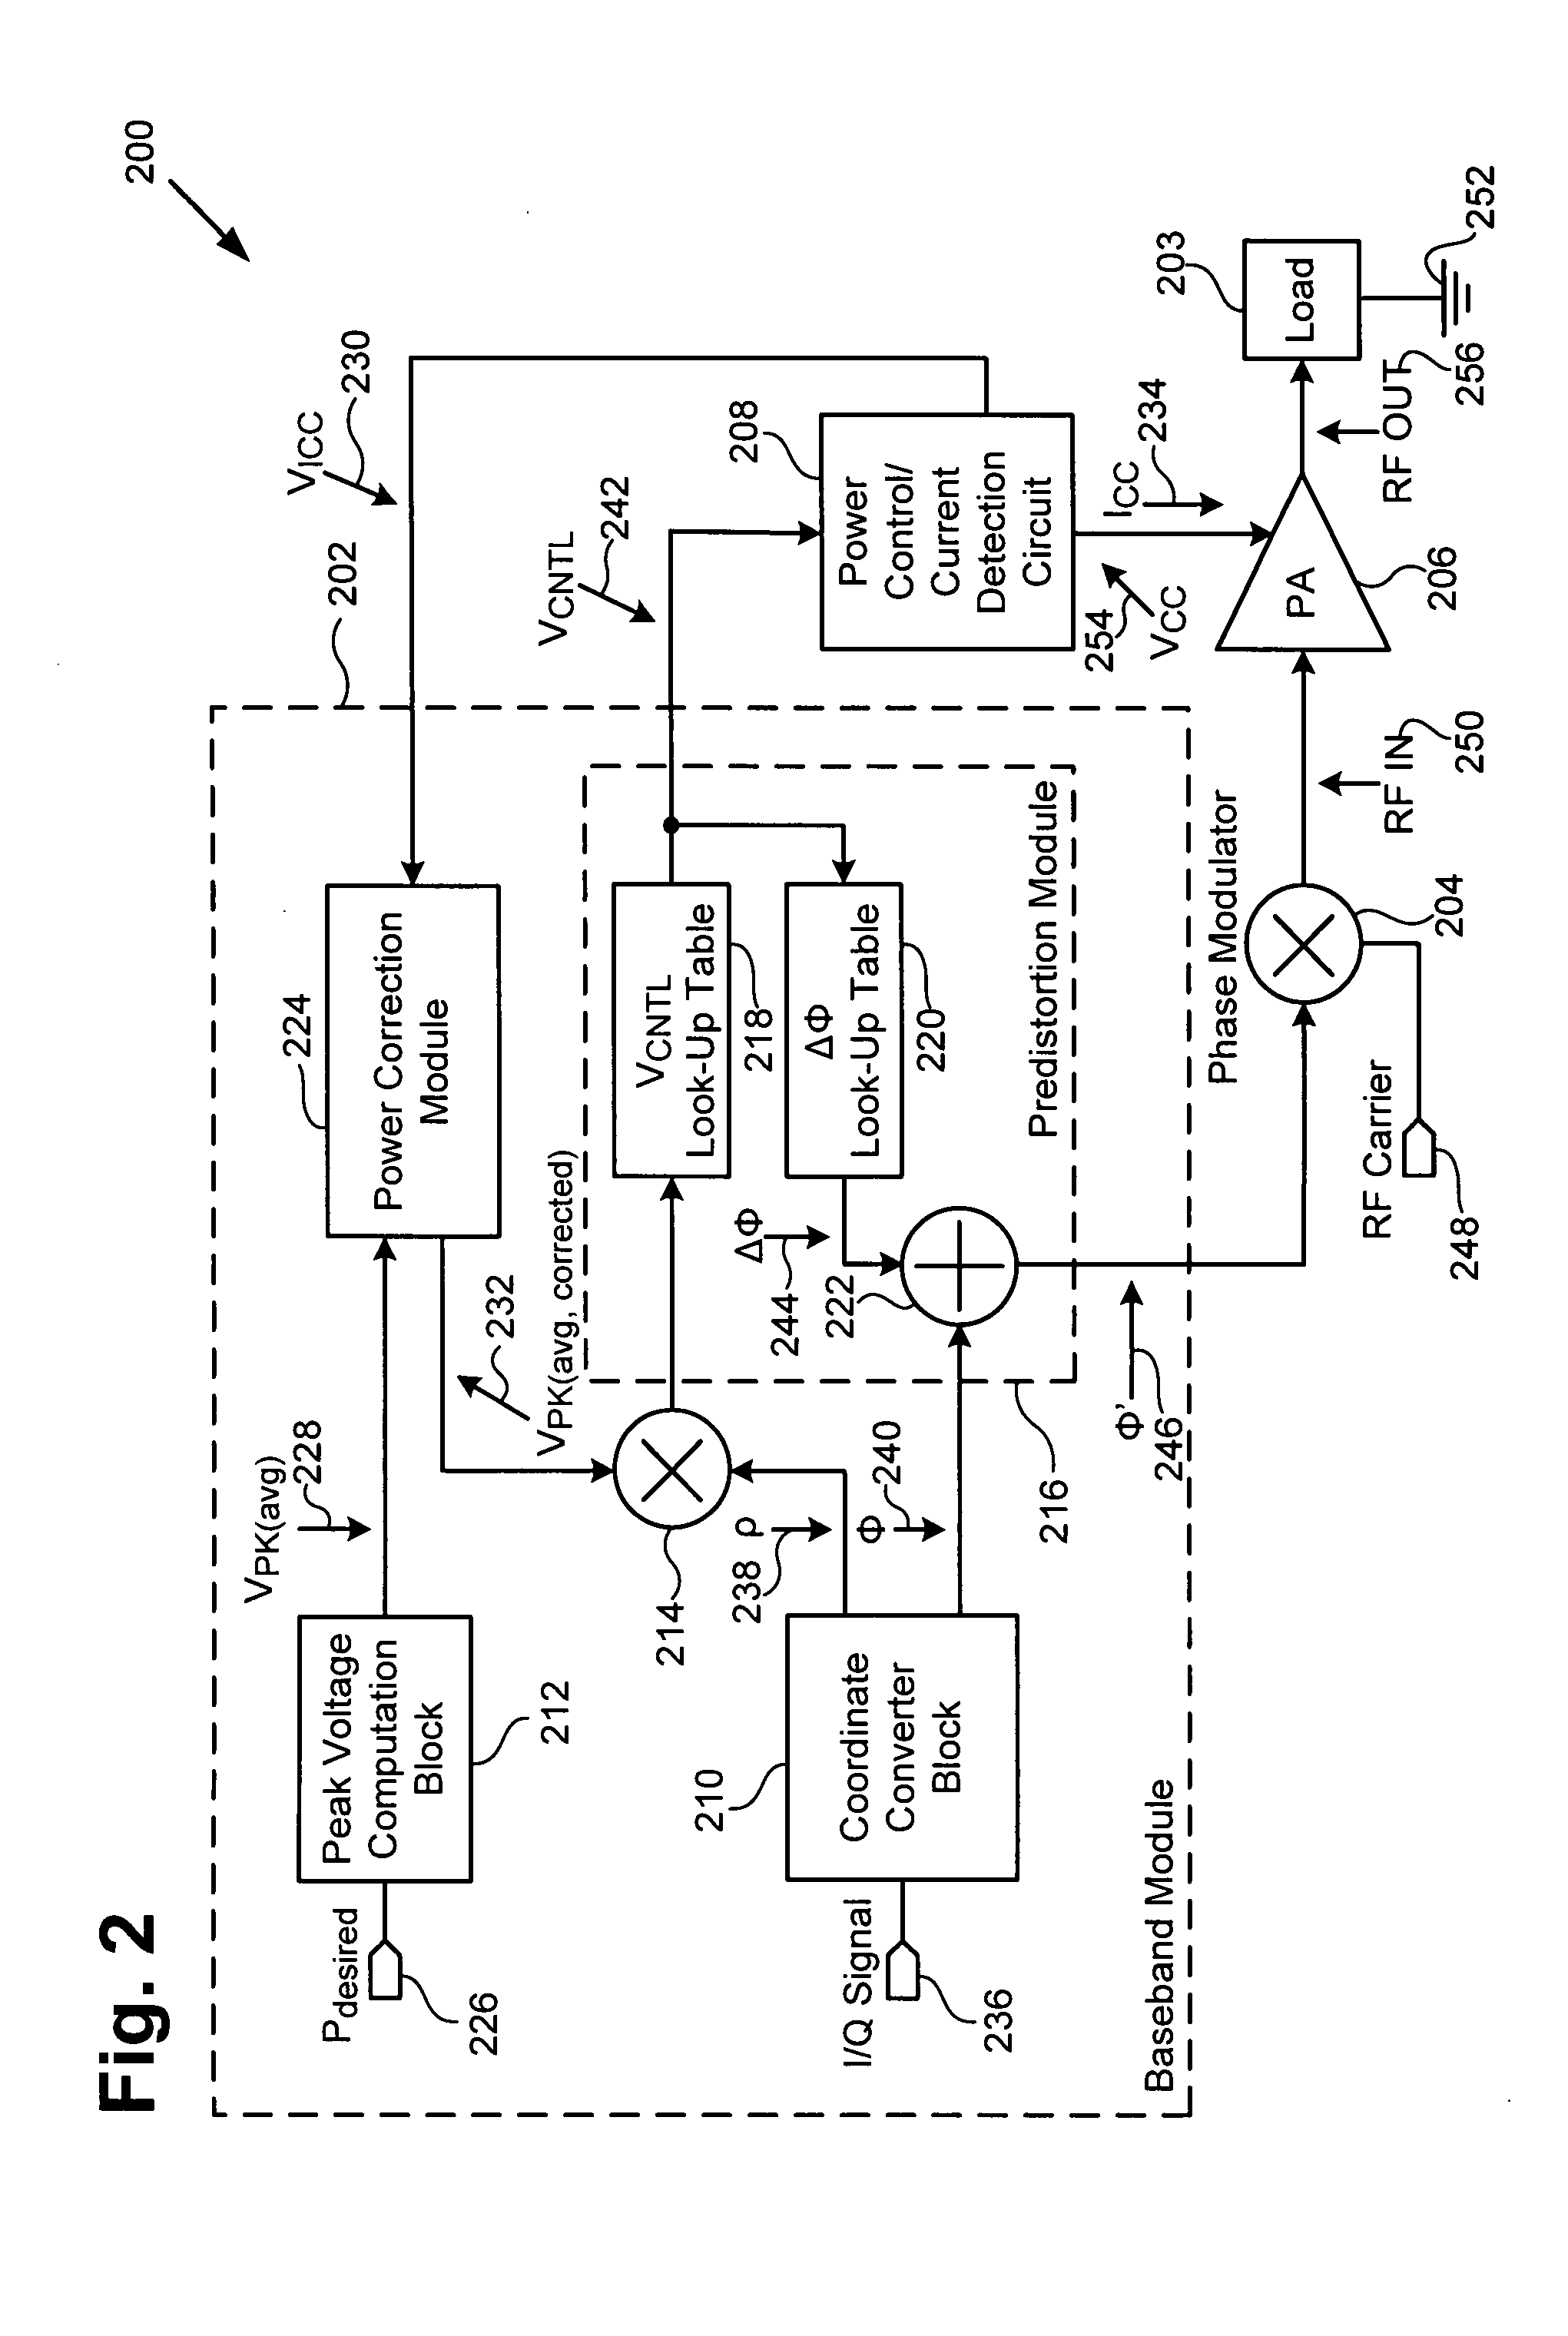 Output power correction module for amplifiers in transmitters